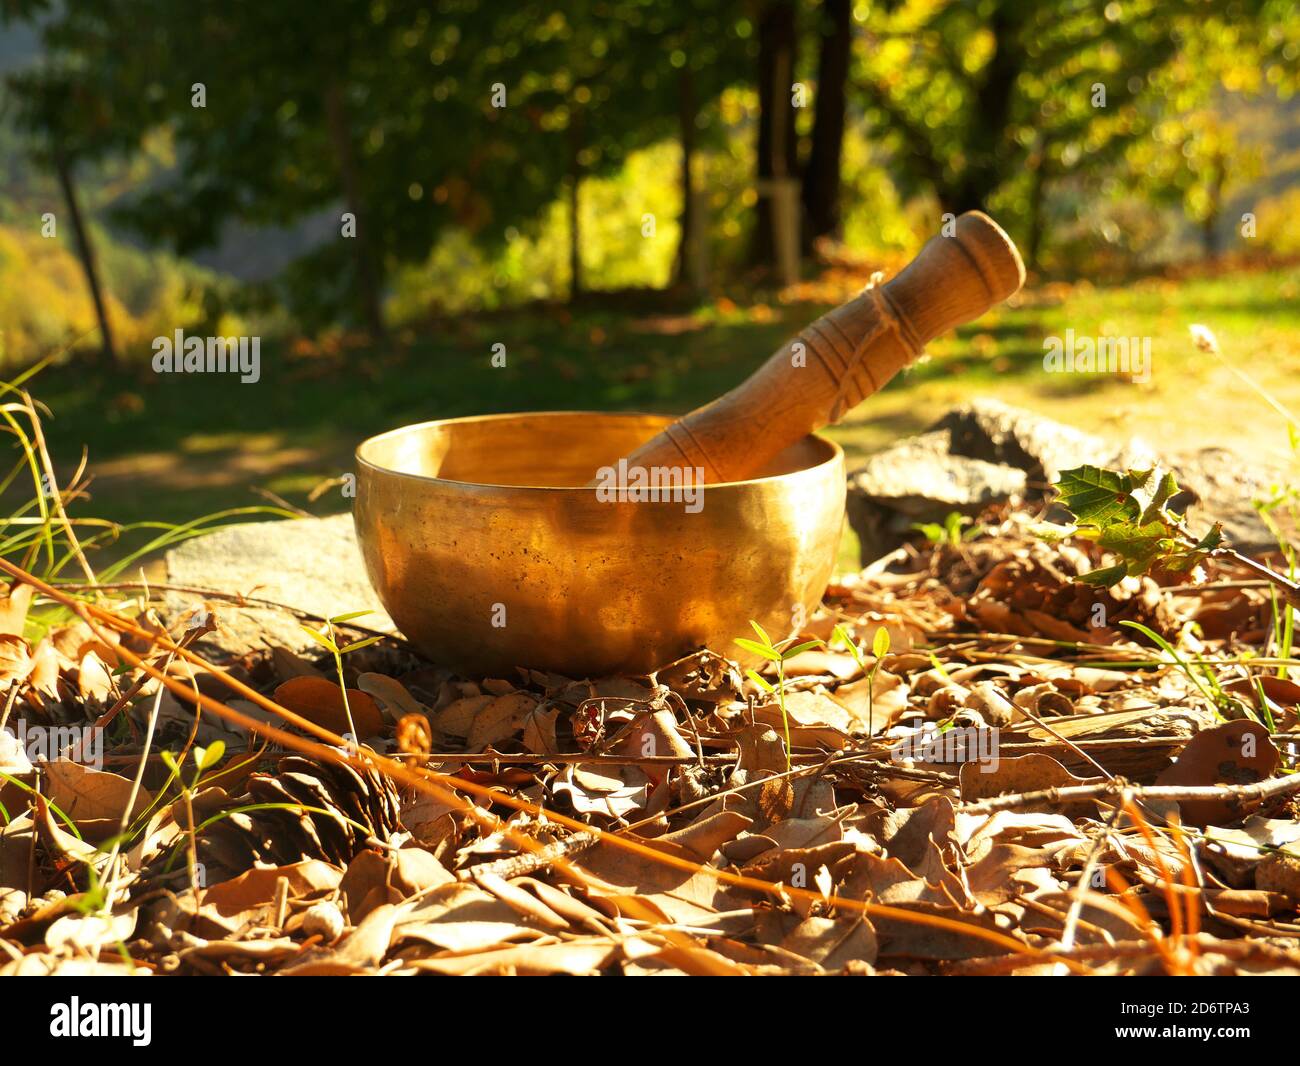 Singing bowl placed on autumn leaves with the forest in the background, during the sunset. Stock Photo